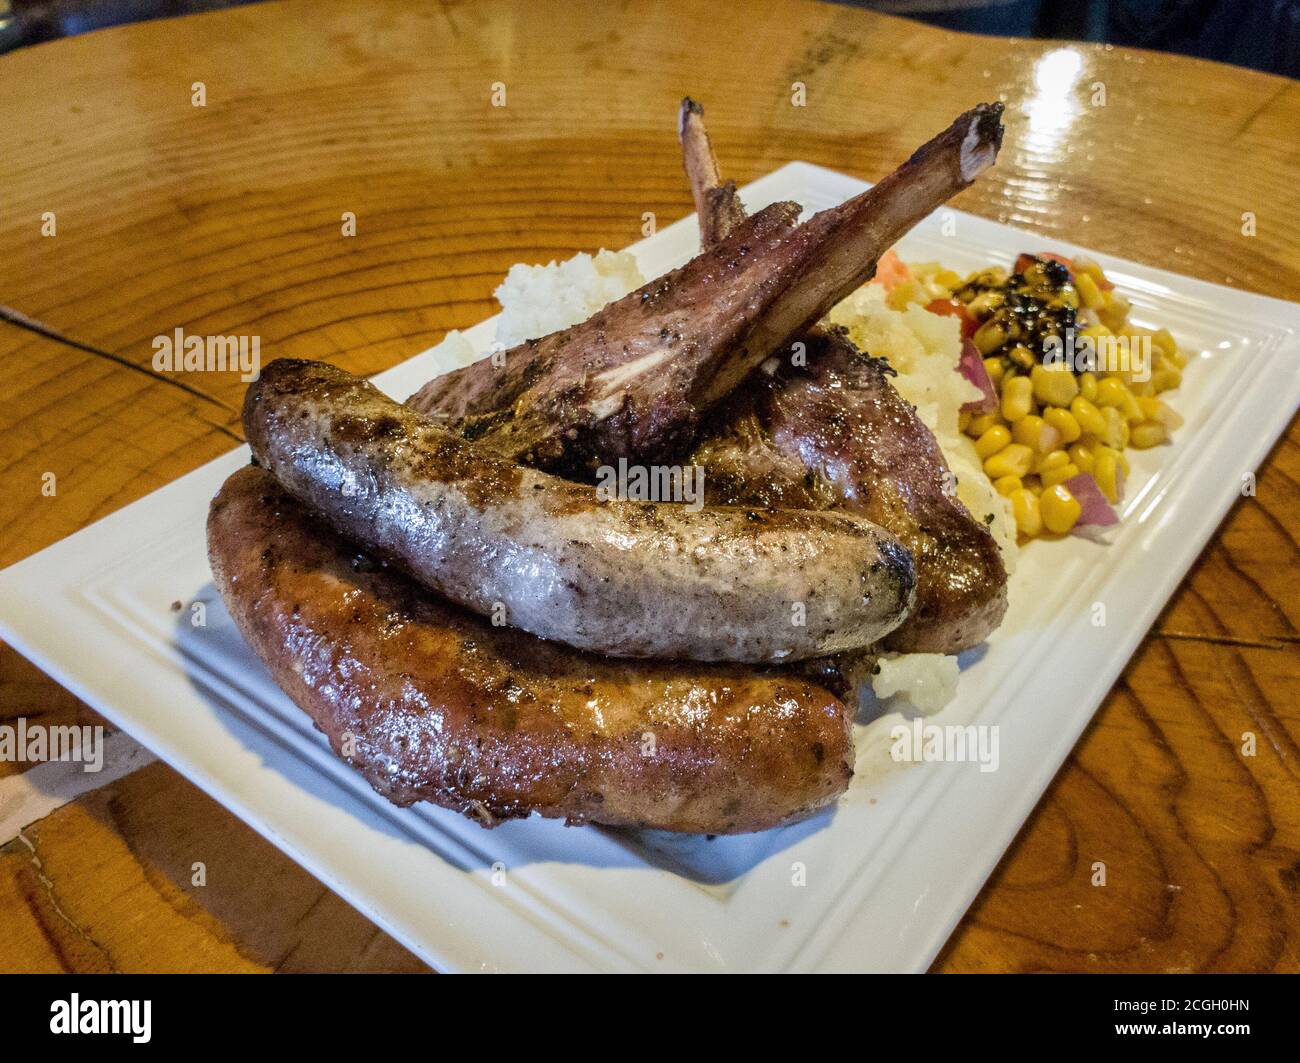 Lamb meat platter -Lamb chop, boerewors which is South African style sausage, pork banger on a plate with garlic potato, creamy spinach and slaw. Stock Photo